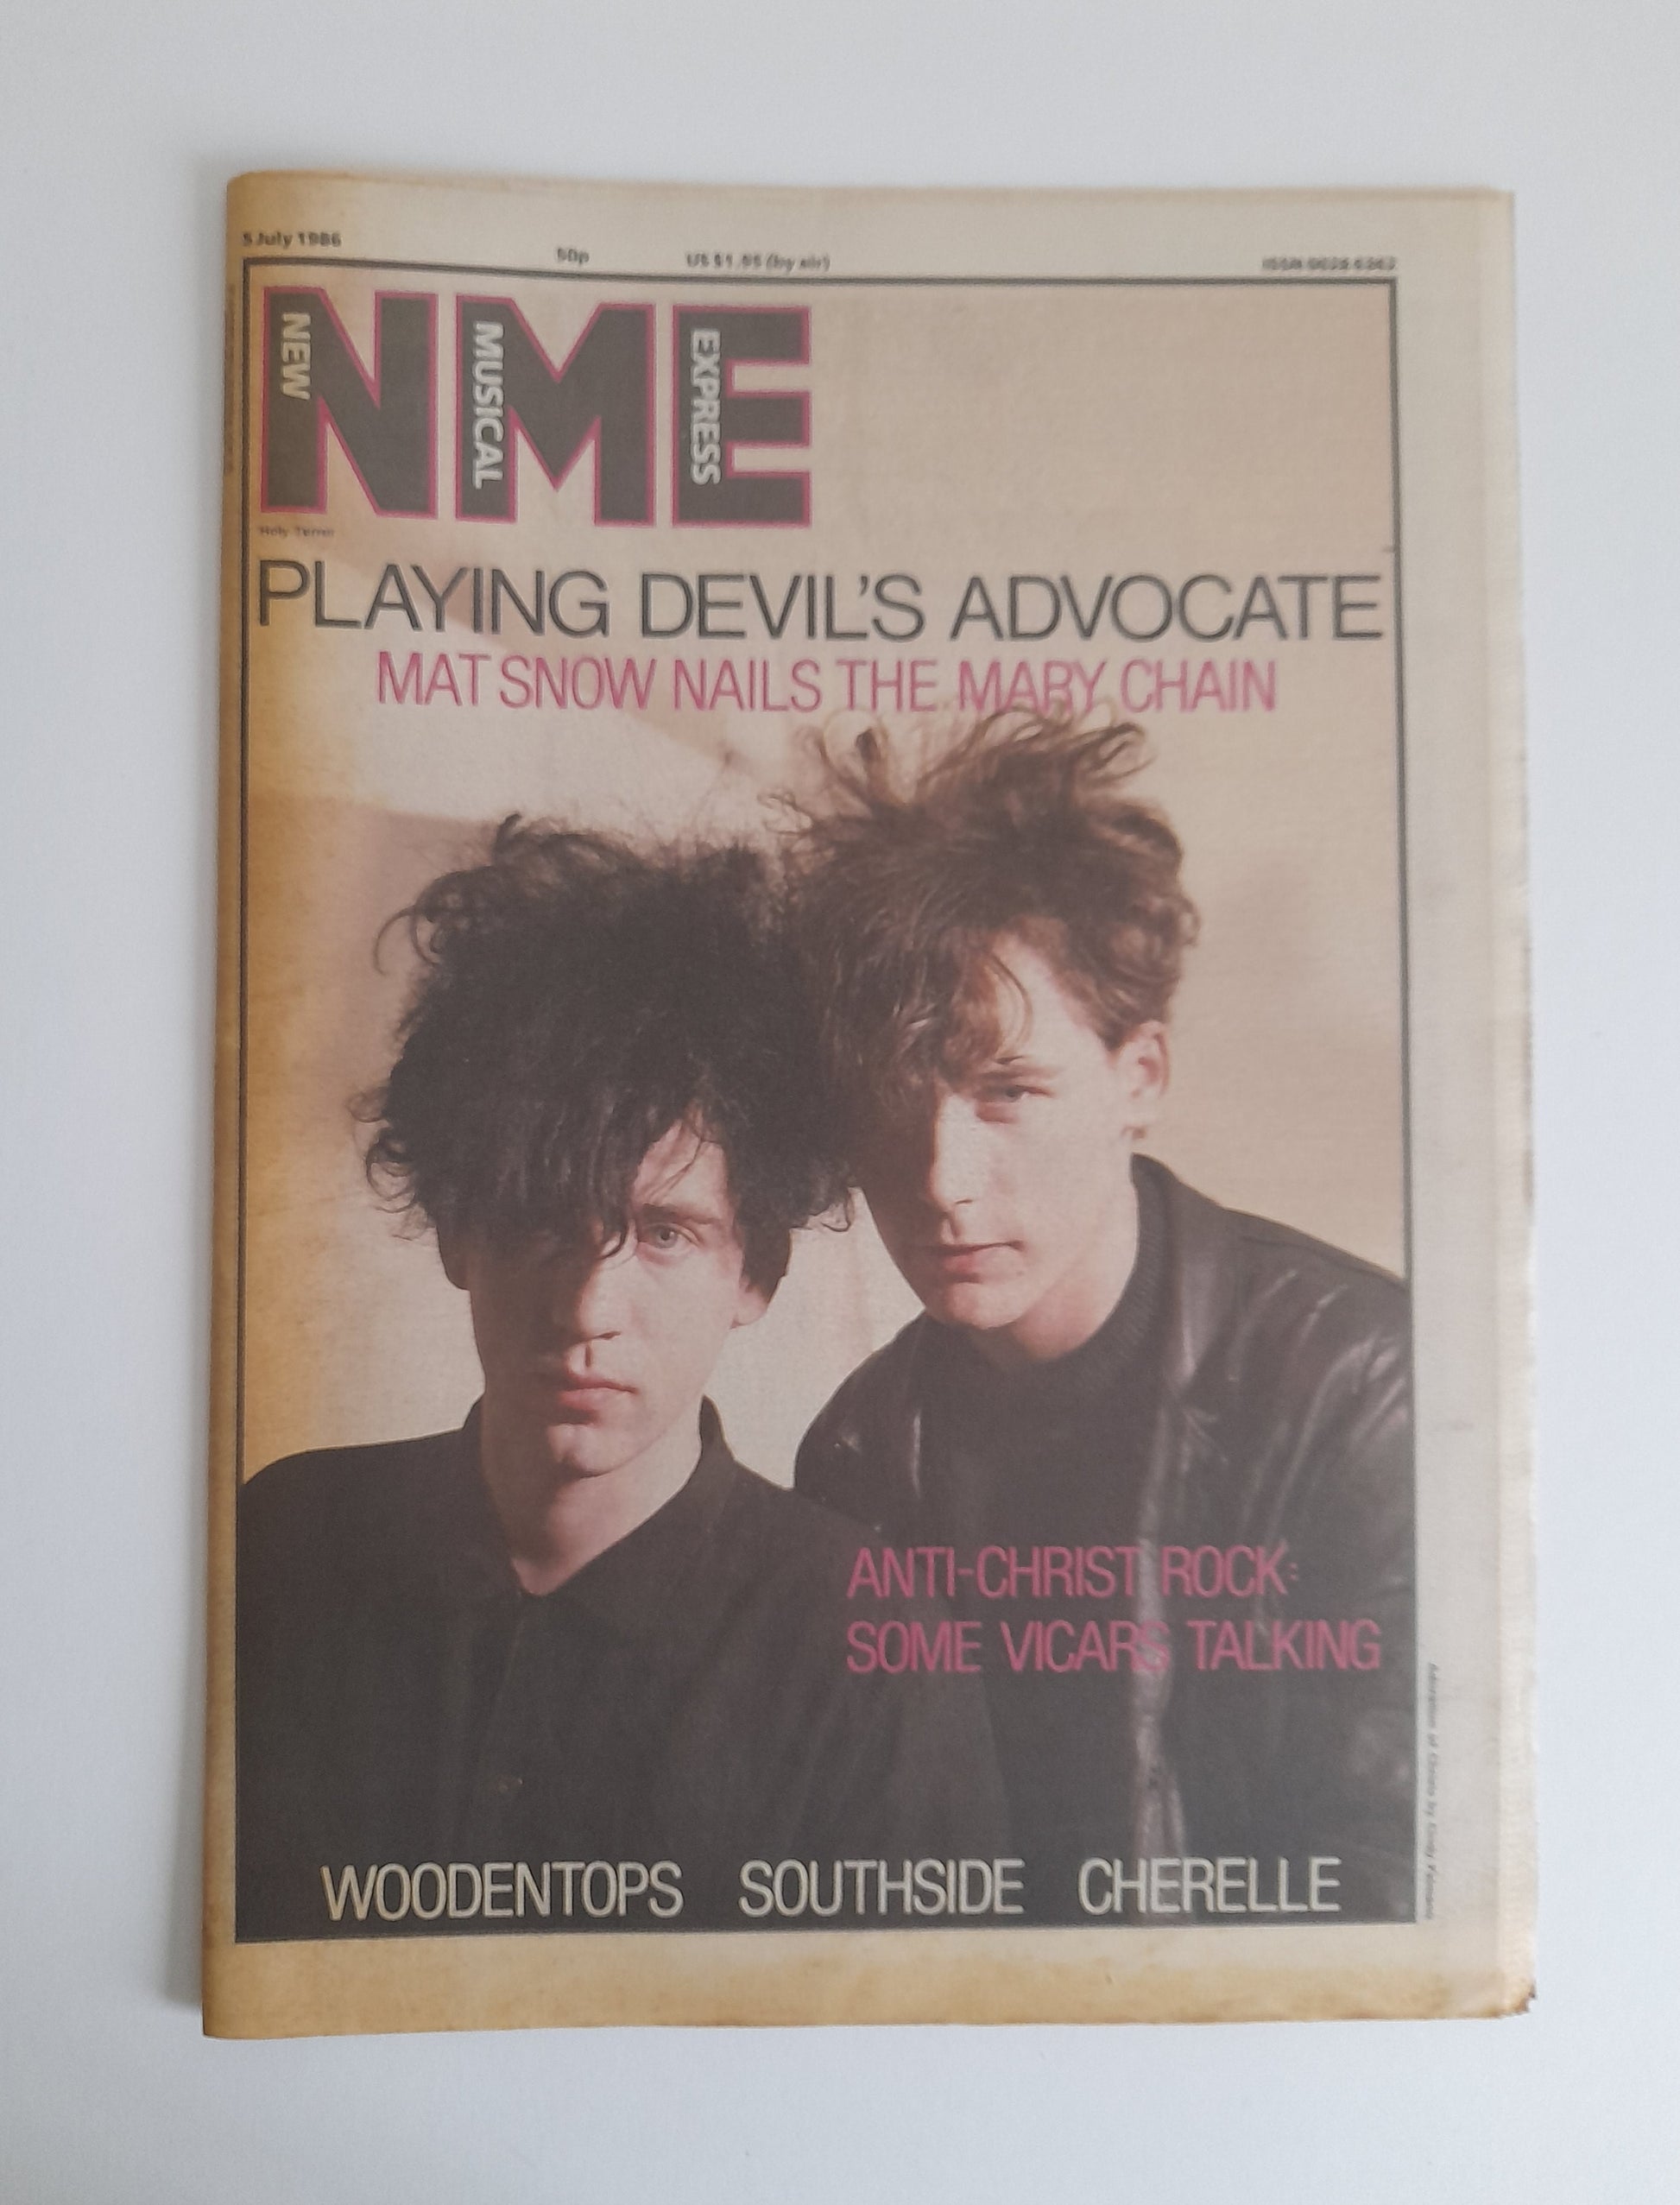 NME Magazine 5th July 1986 Jesus and Mary Chain, Woodentops